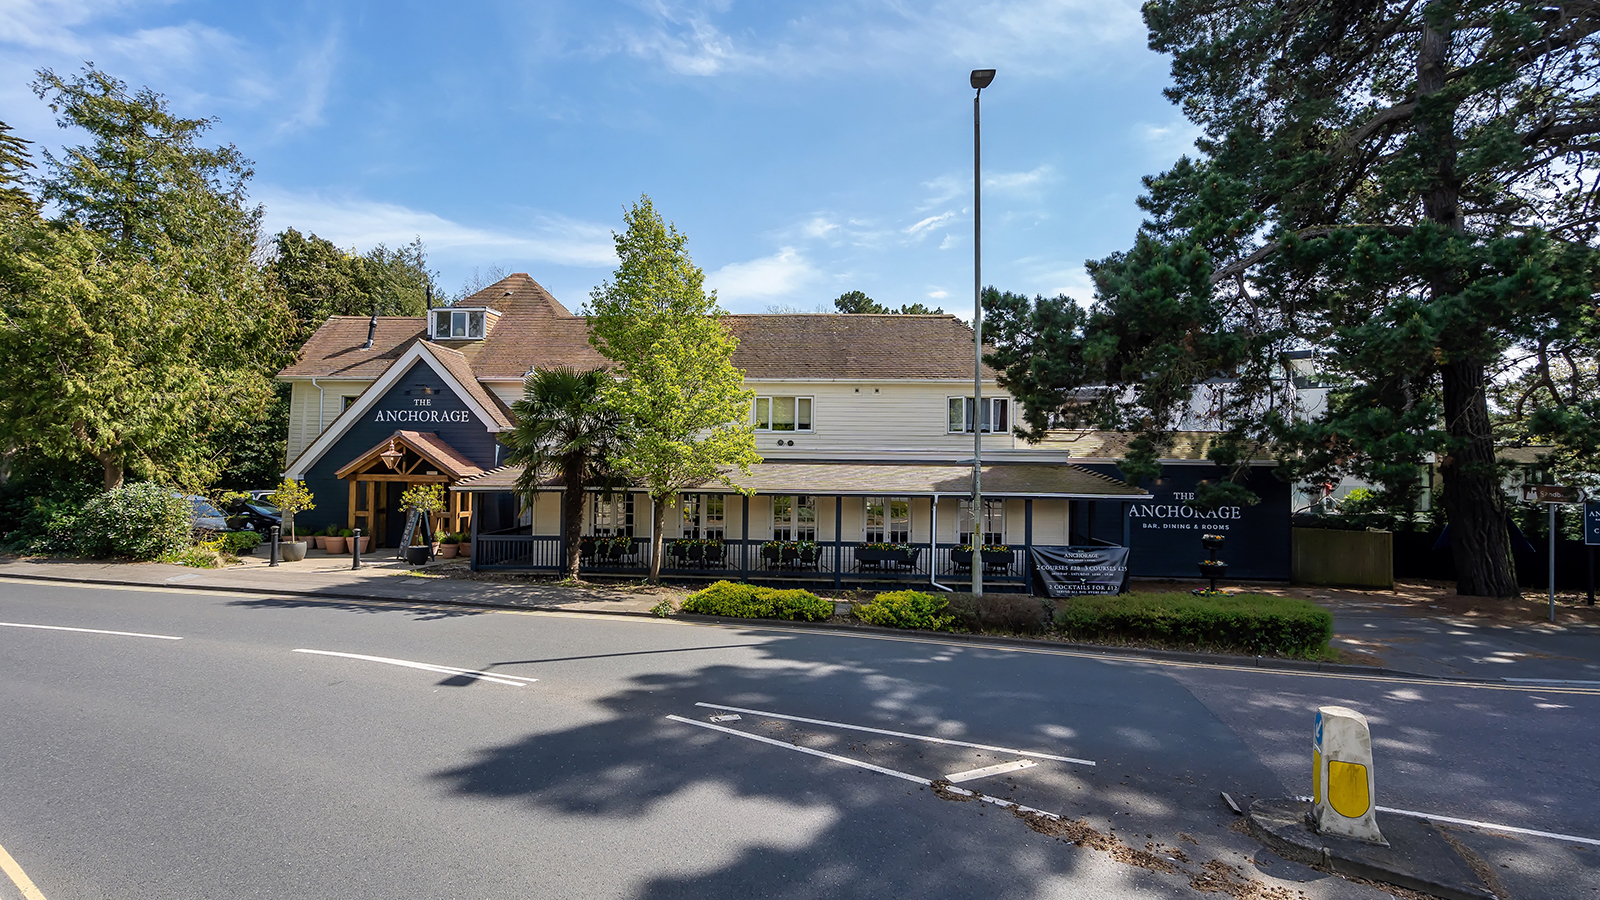 The Anchorage<br>47 Haven Road, Canford Cliffs<br>Poole<br>Dorset<br>BH13 7LH